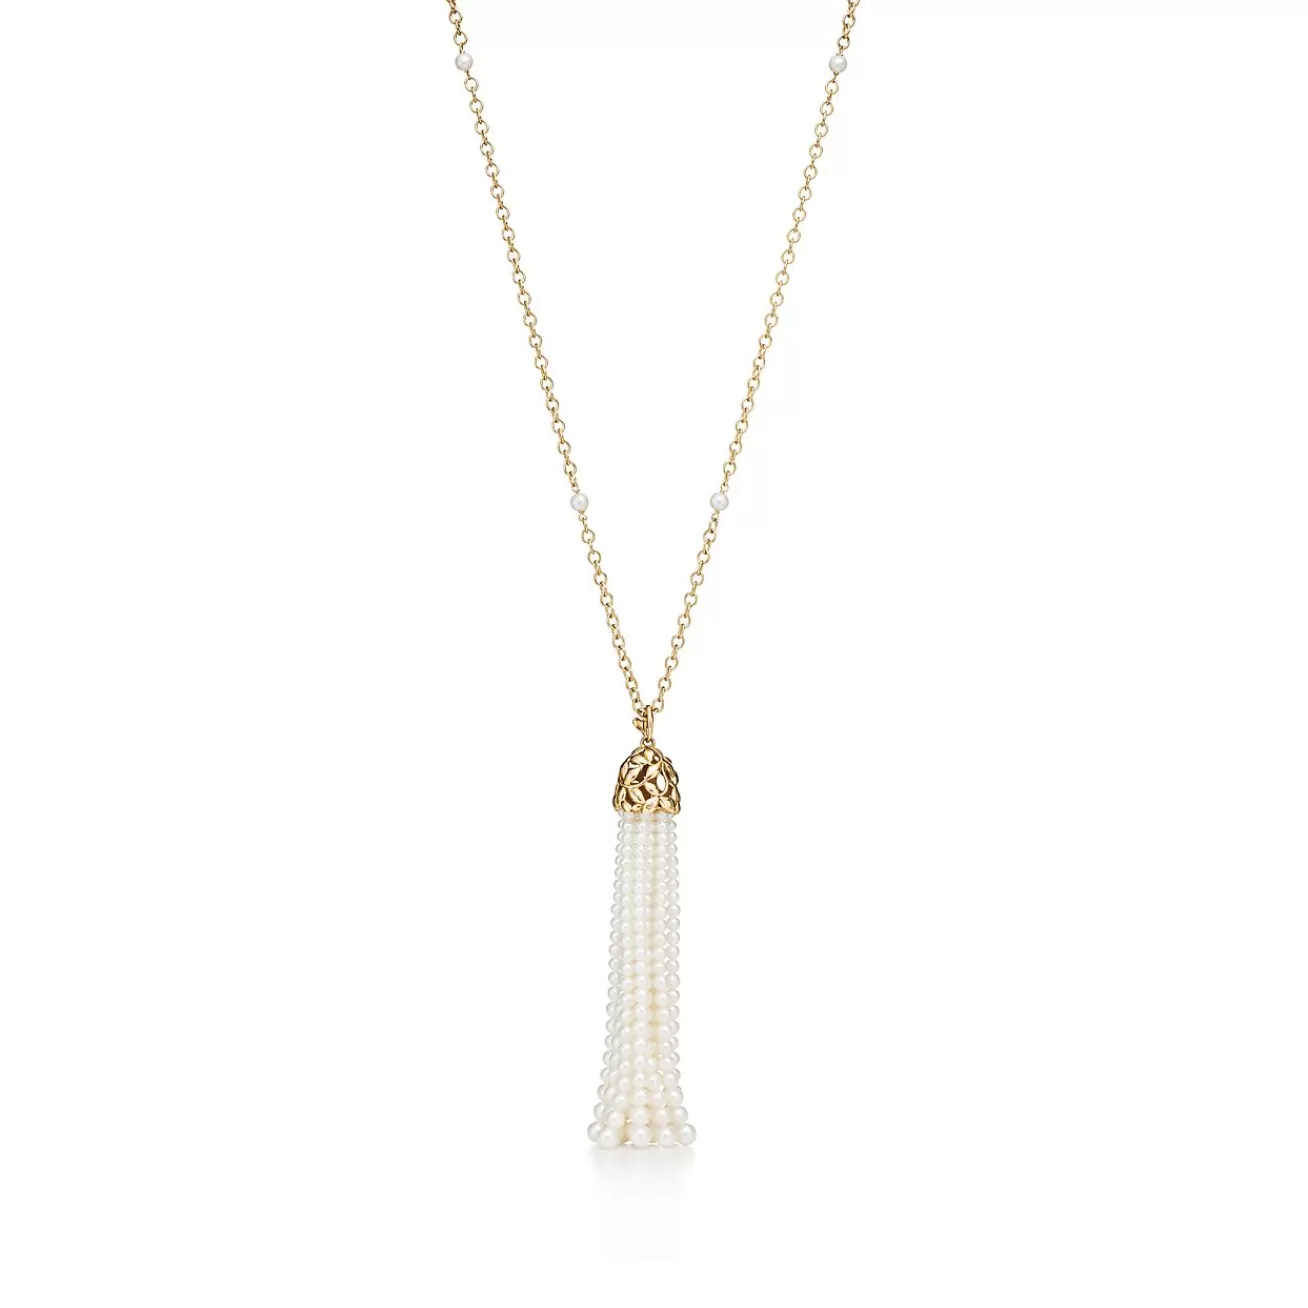 Tiffany & Co. Paloma Picasso® Olive Leaf tassel necklace in 18k gold with pearls, large. | ^ Necklaces & Pendants | Gold Jewelry